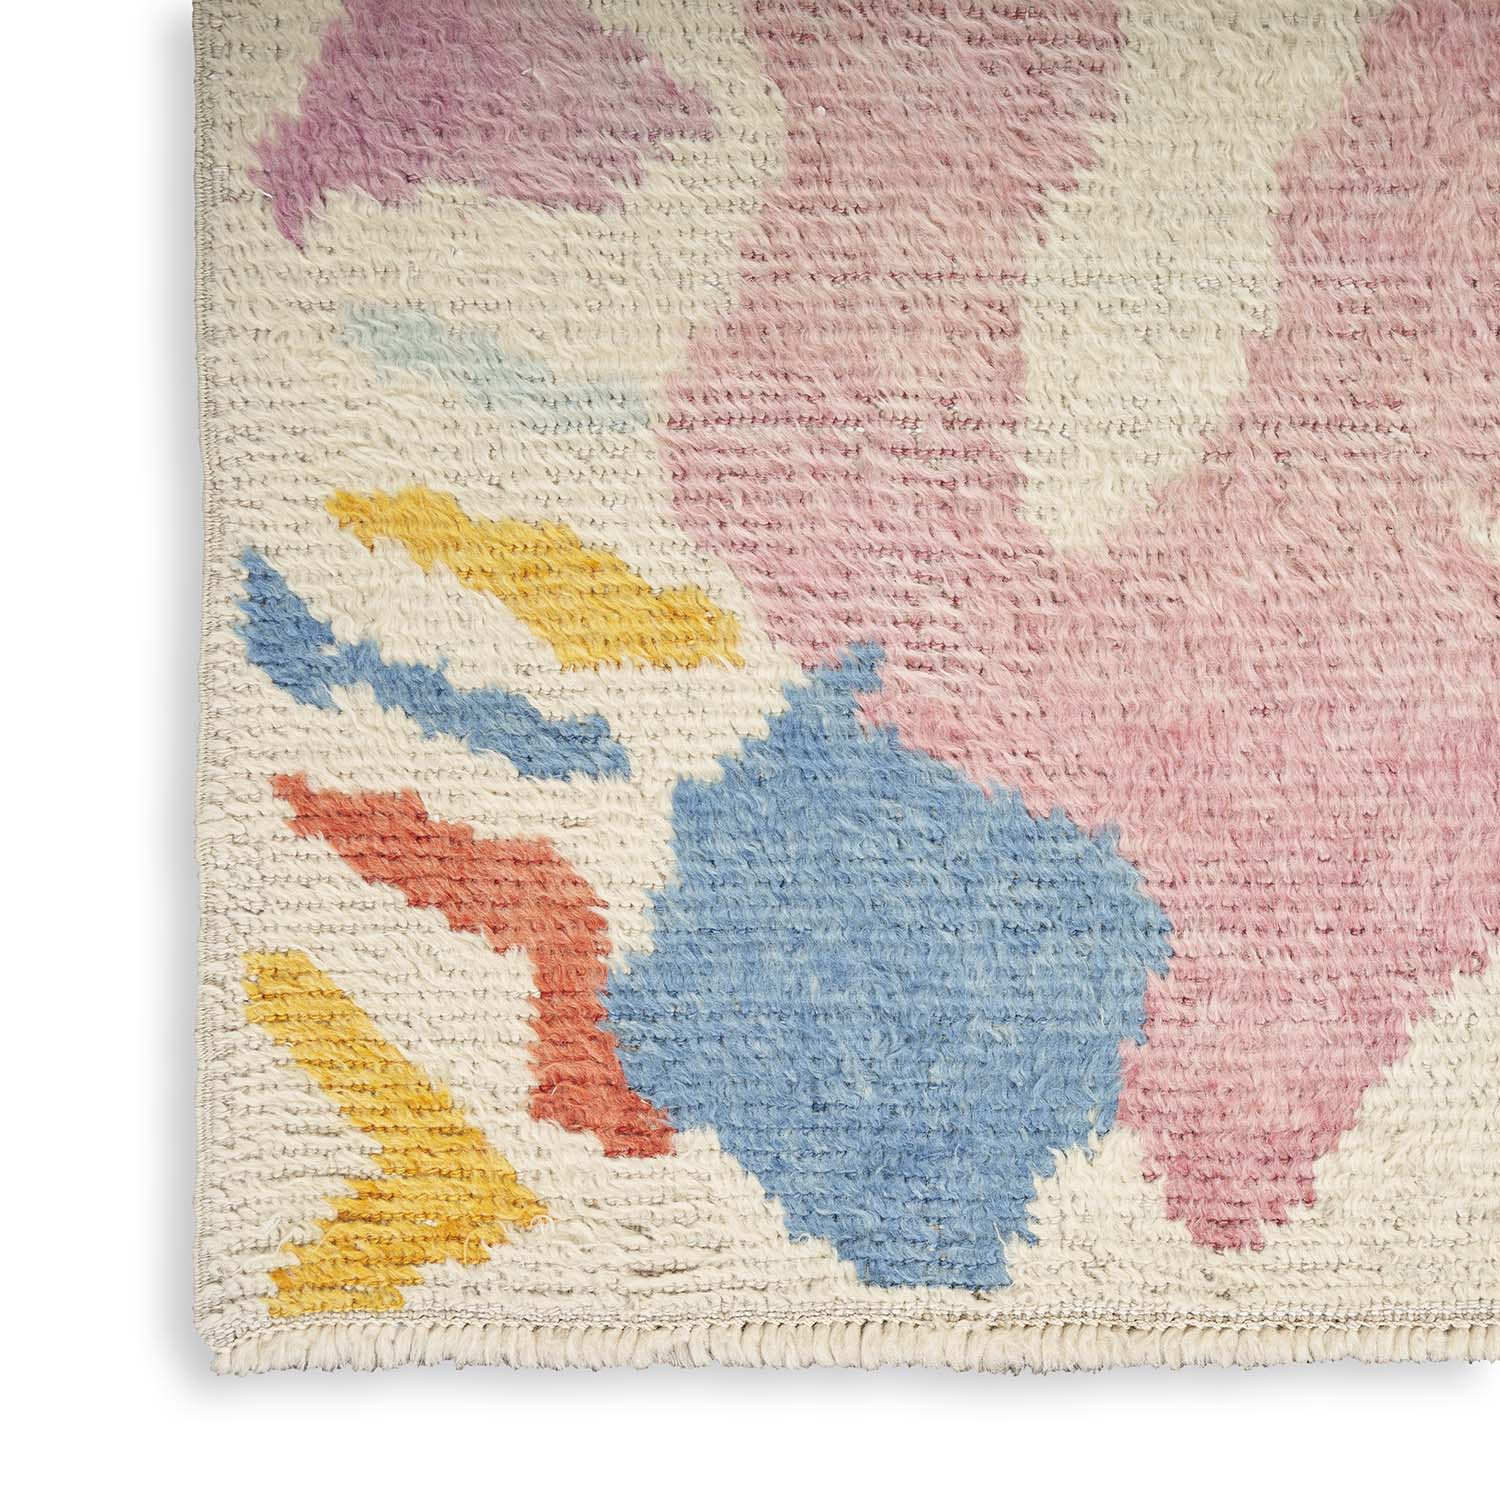 Abstract looped pile rug with pastel colors and textured look.